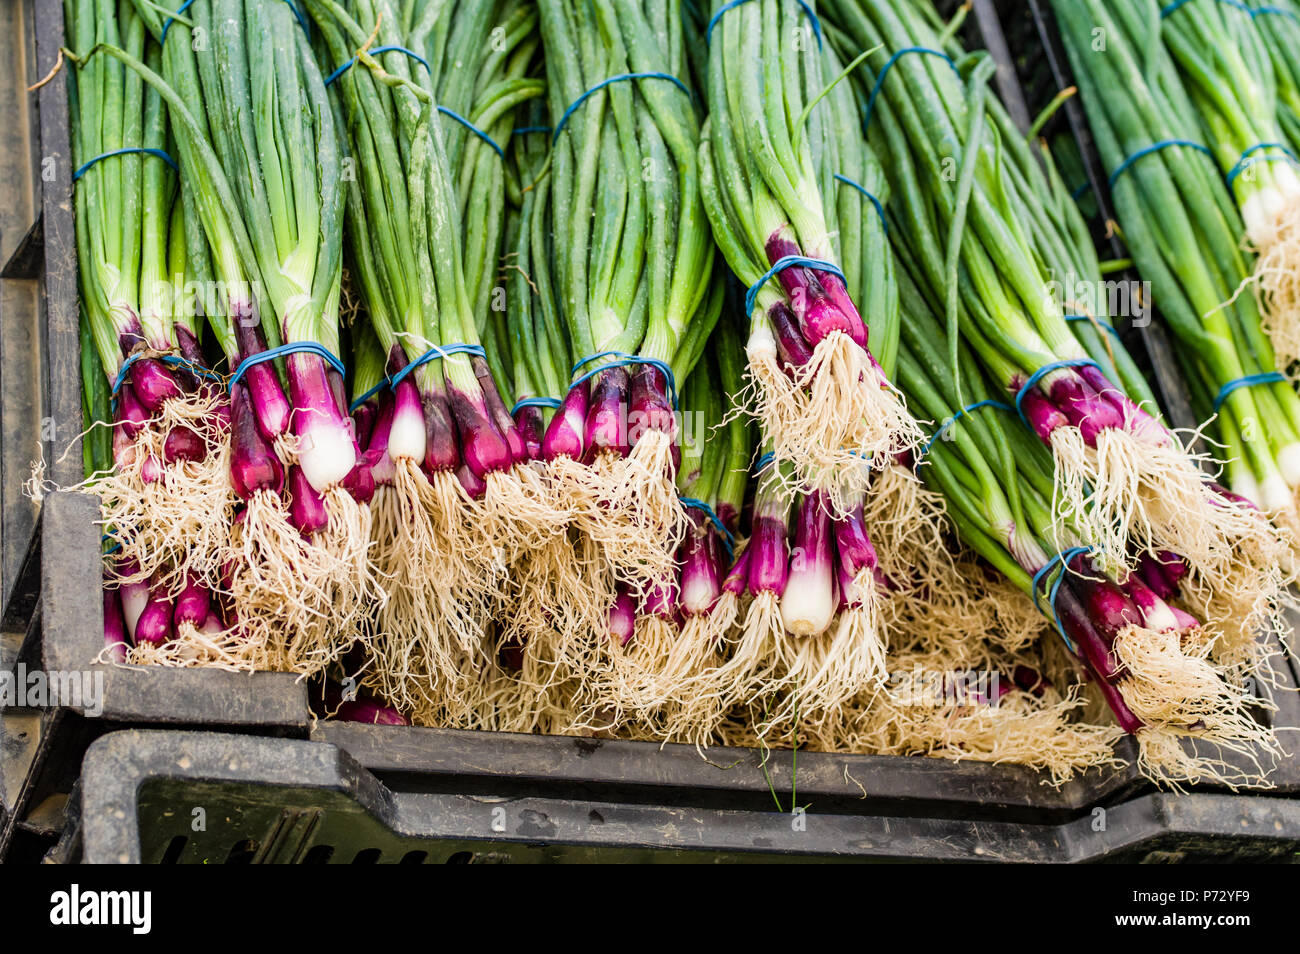 Display of red onions in bunches at the market Stock Photo